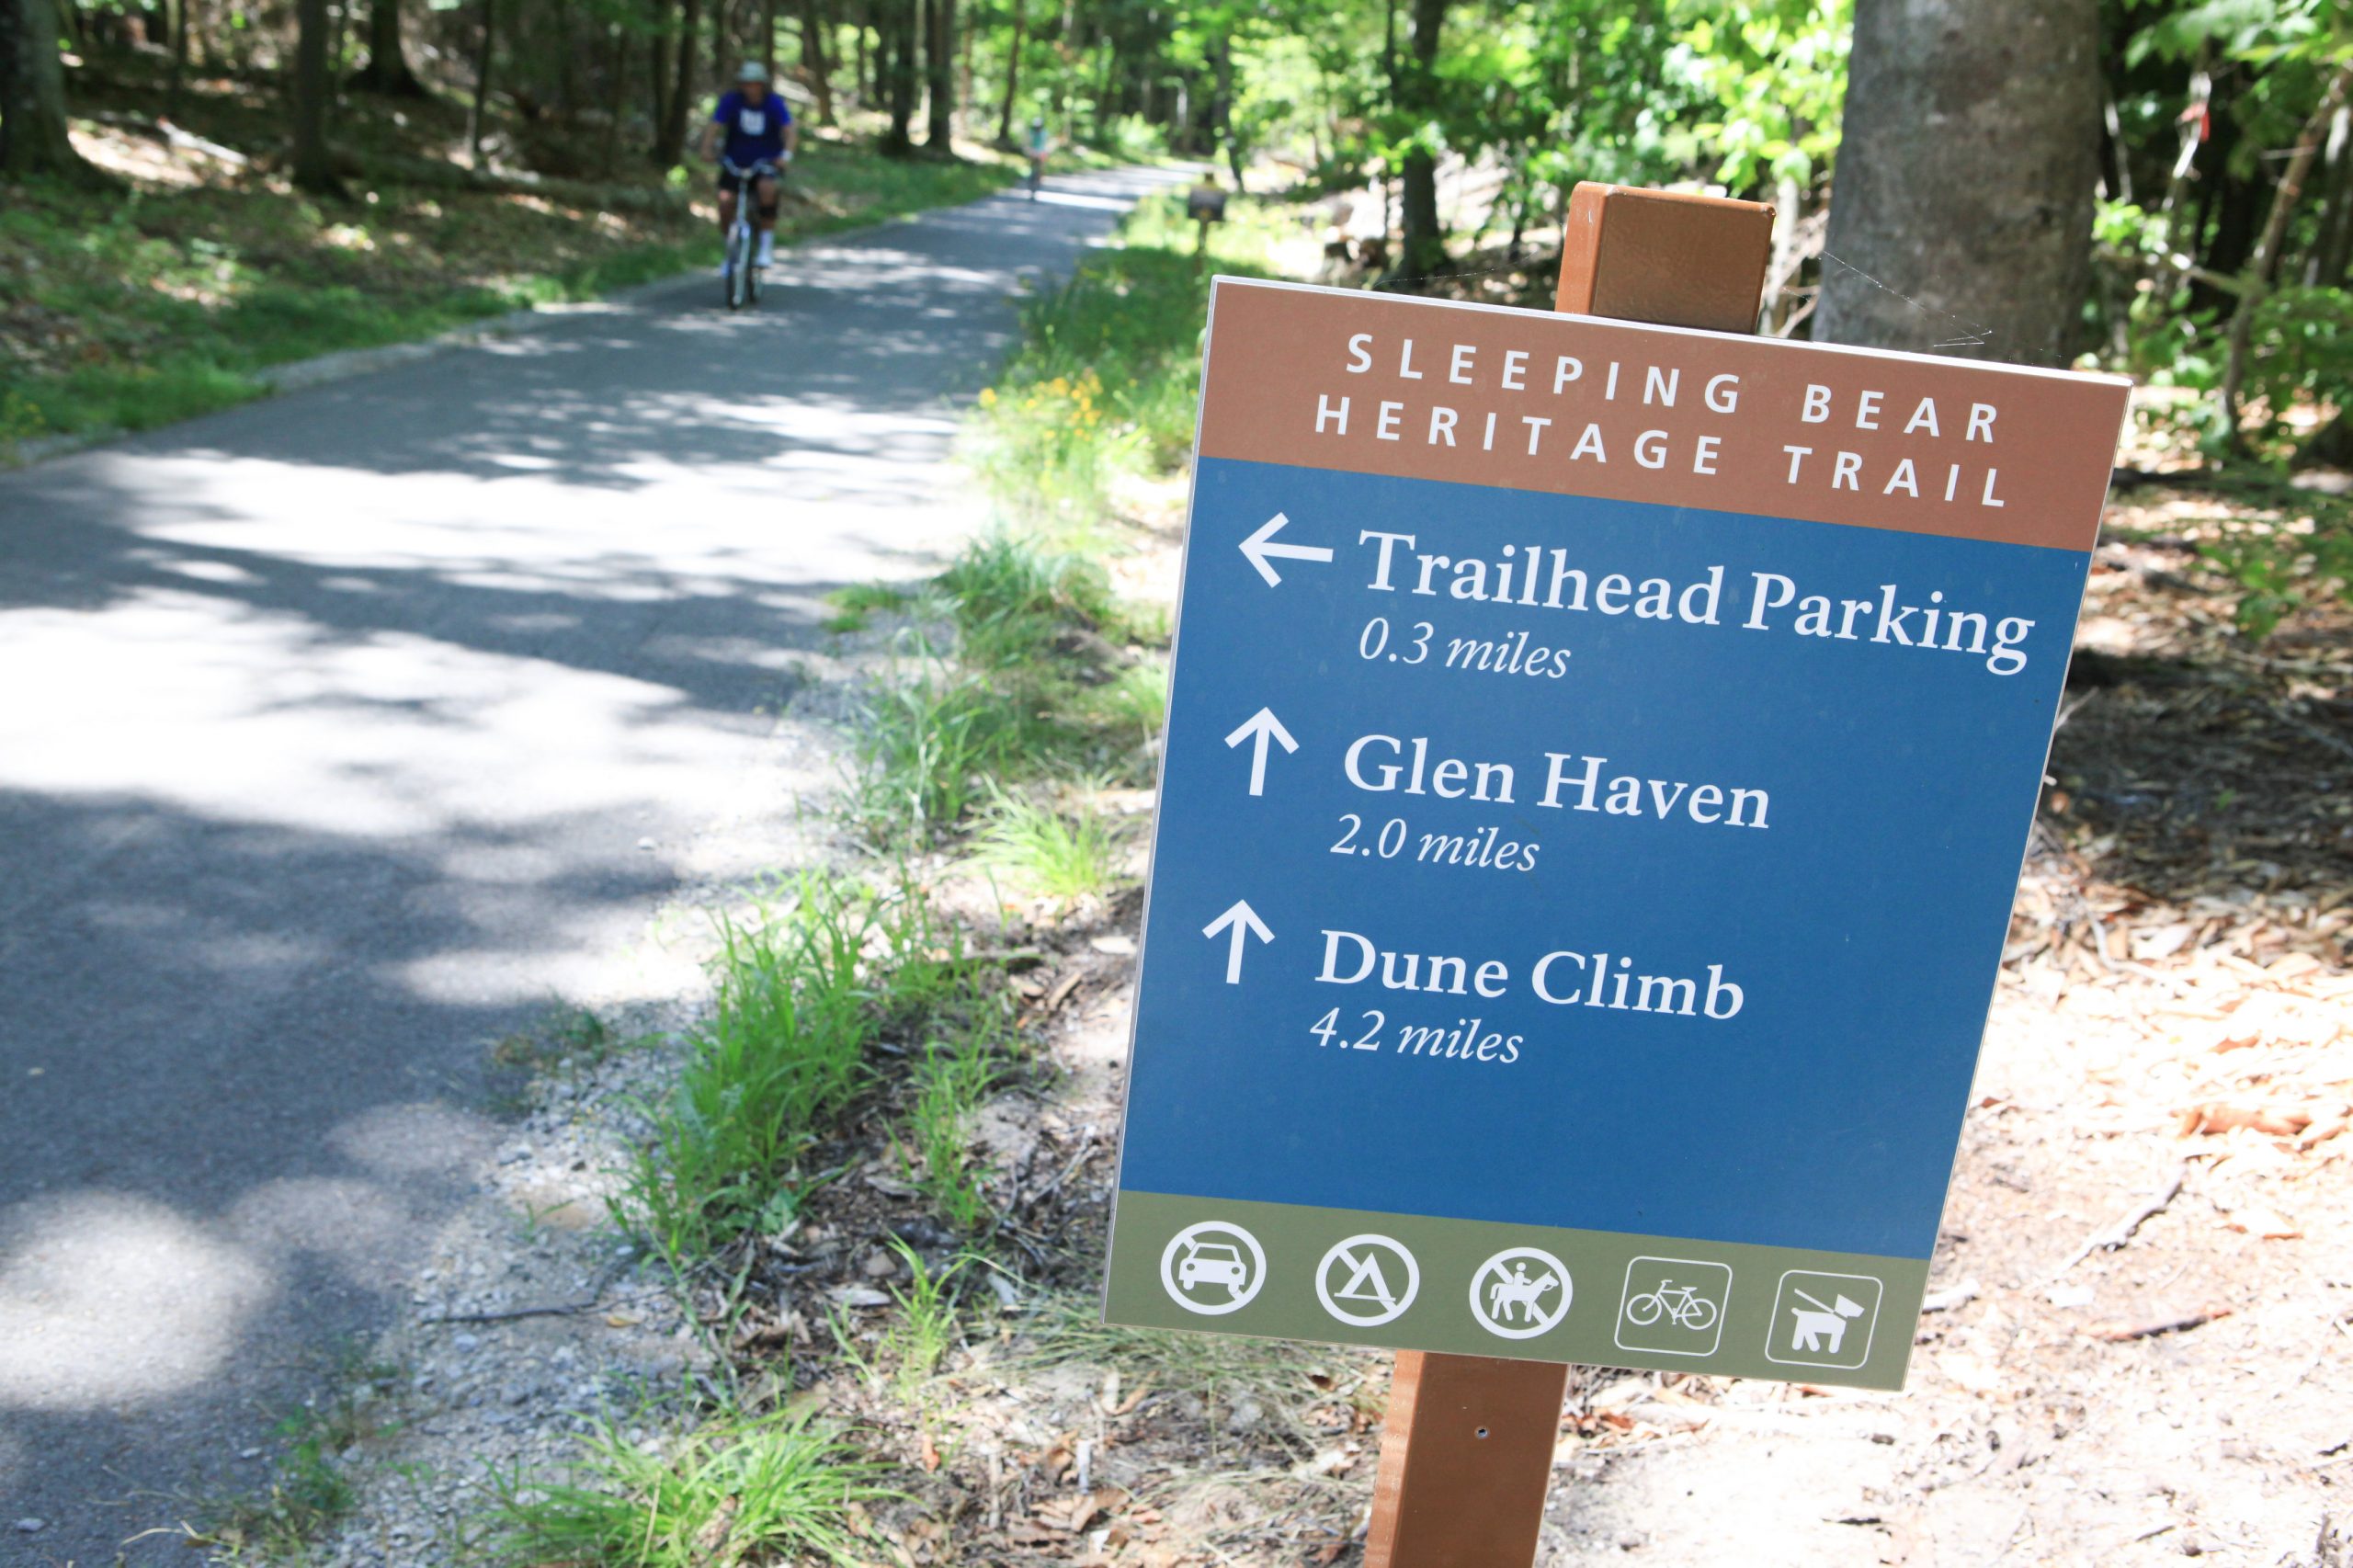 A directional sign on the Sleeping Bear Dunes Heritage Trail